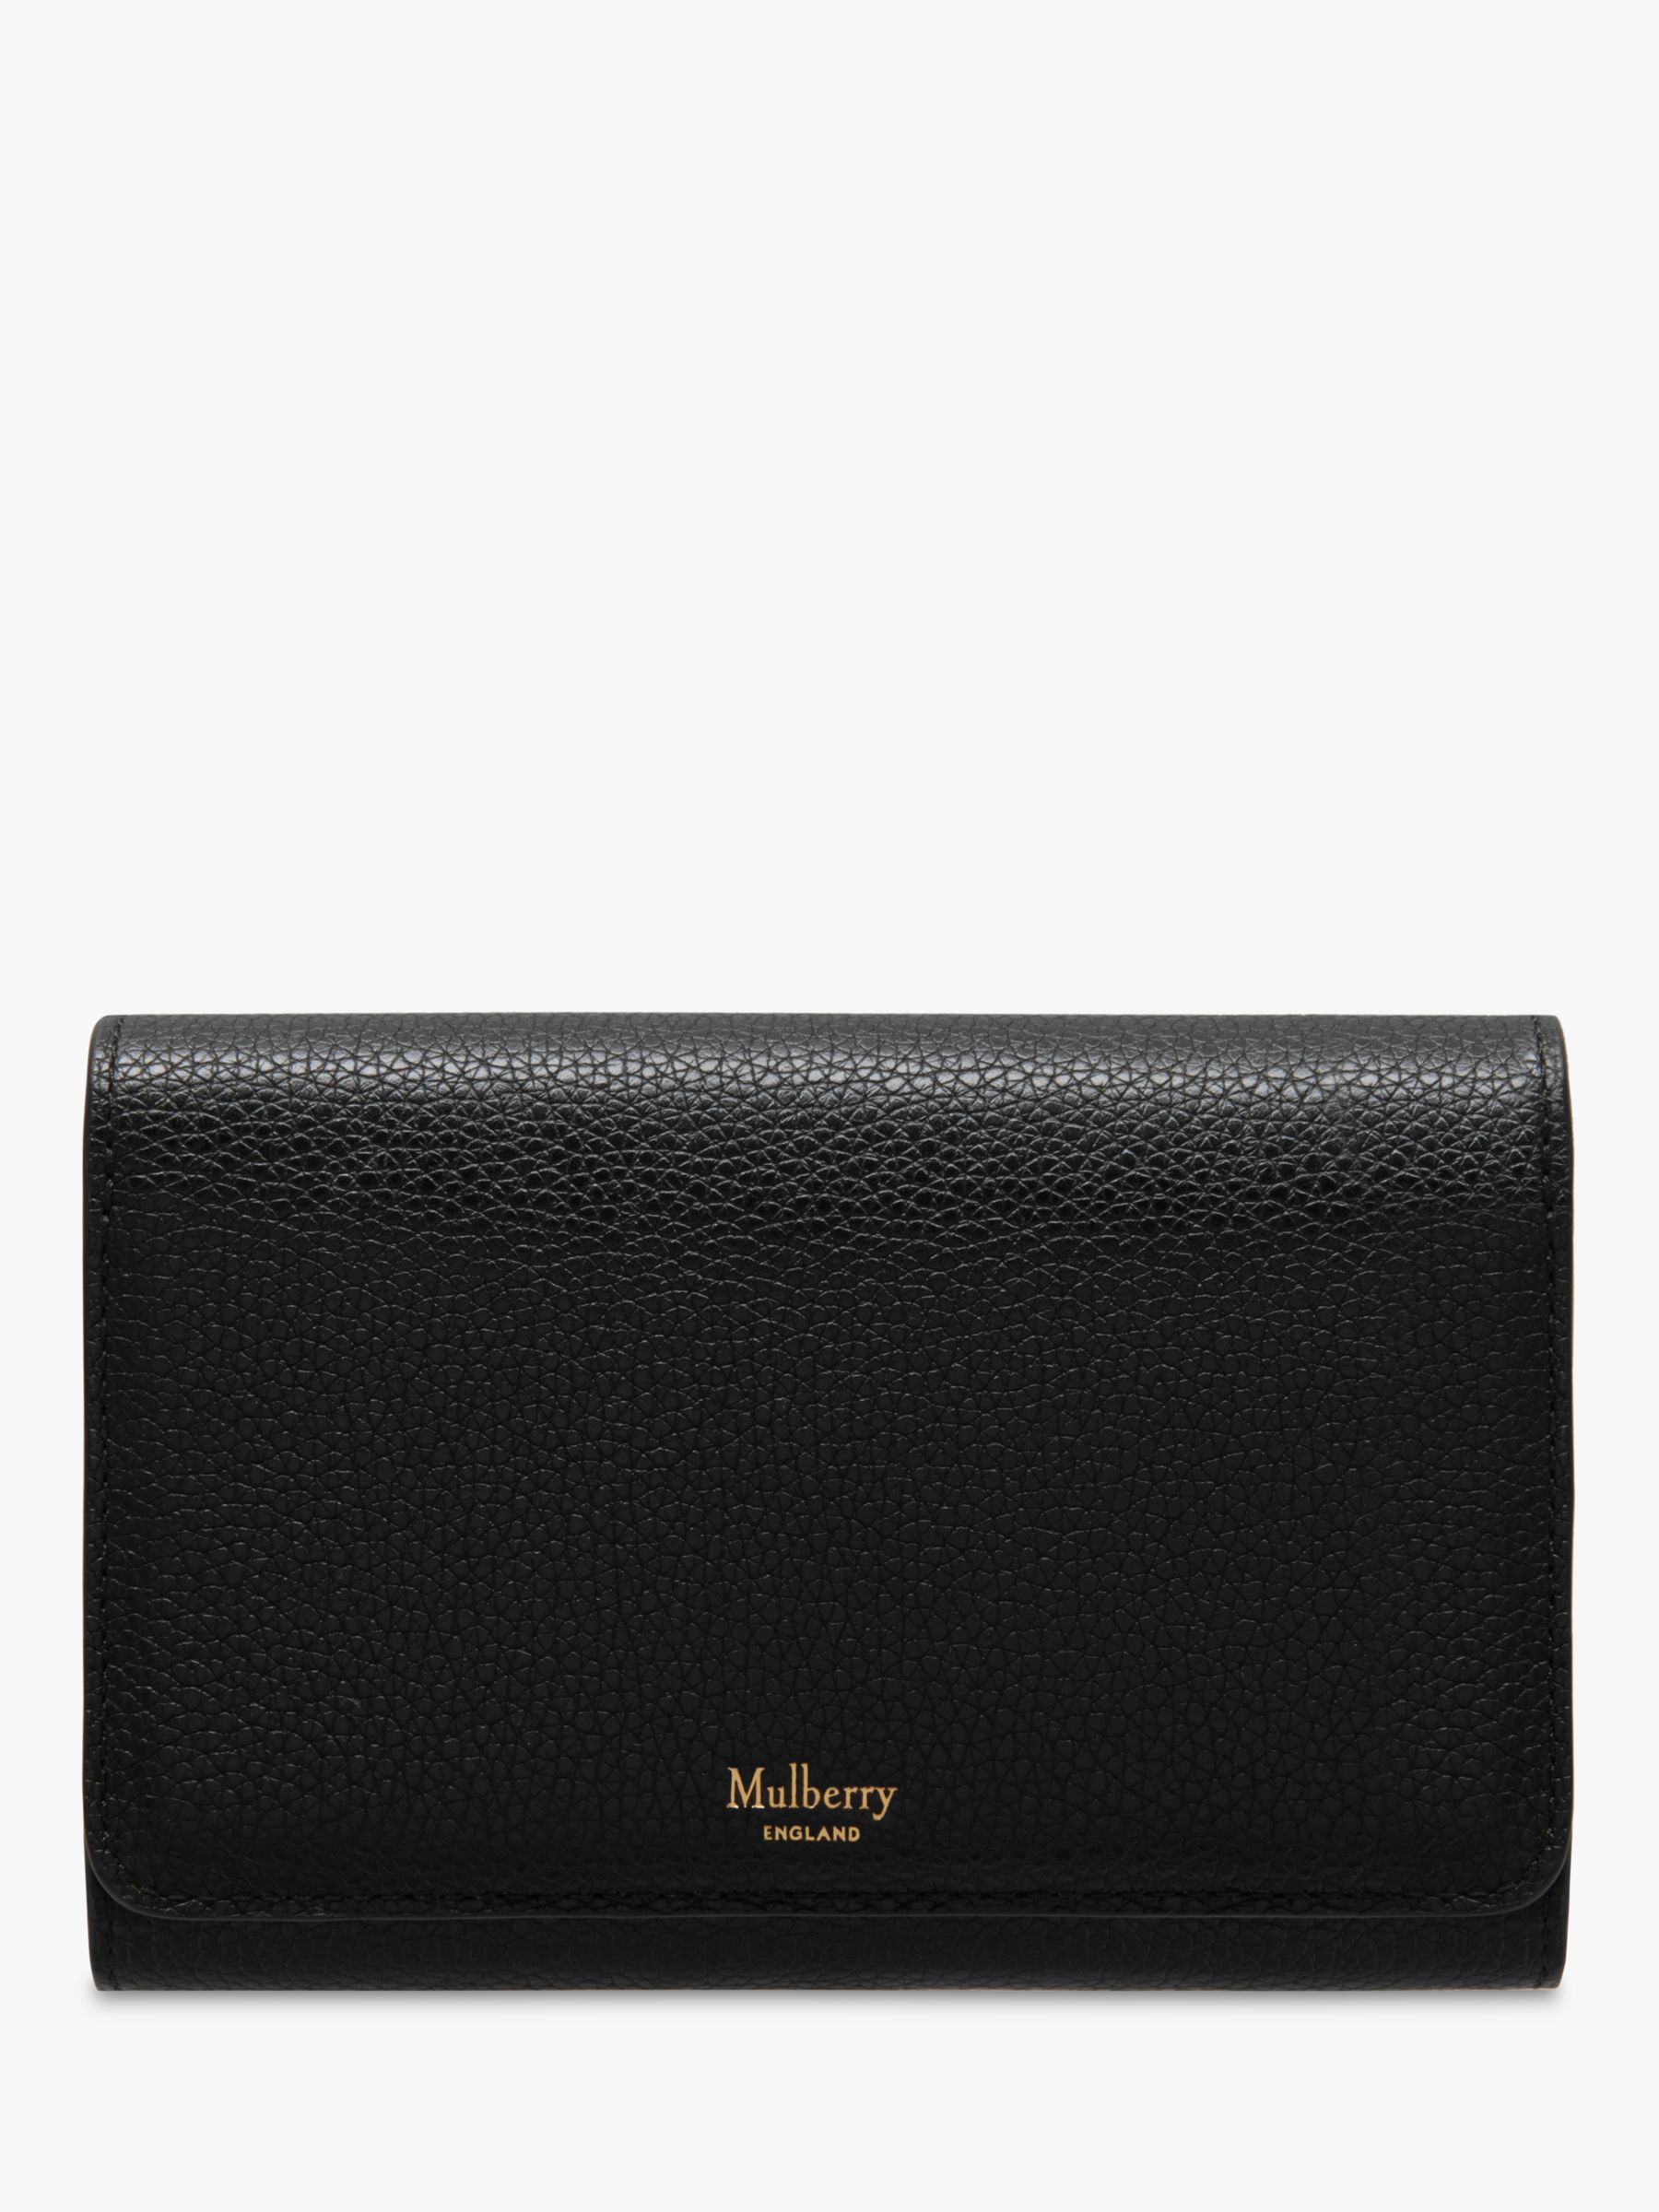 Buy Mulberry Continental Small Classic Grain Leather Medium French Purse Online at johnlewis.com